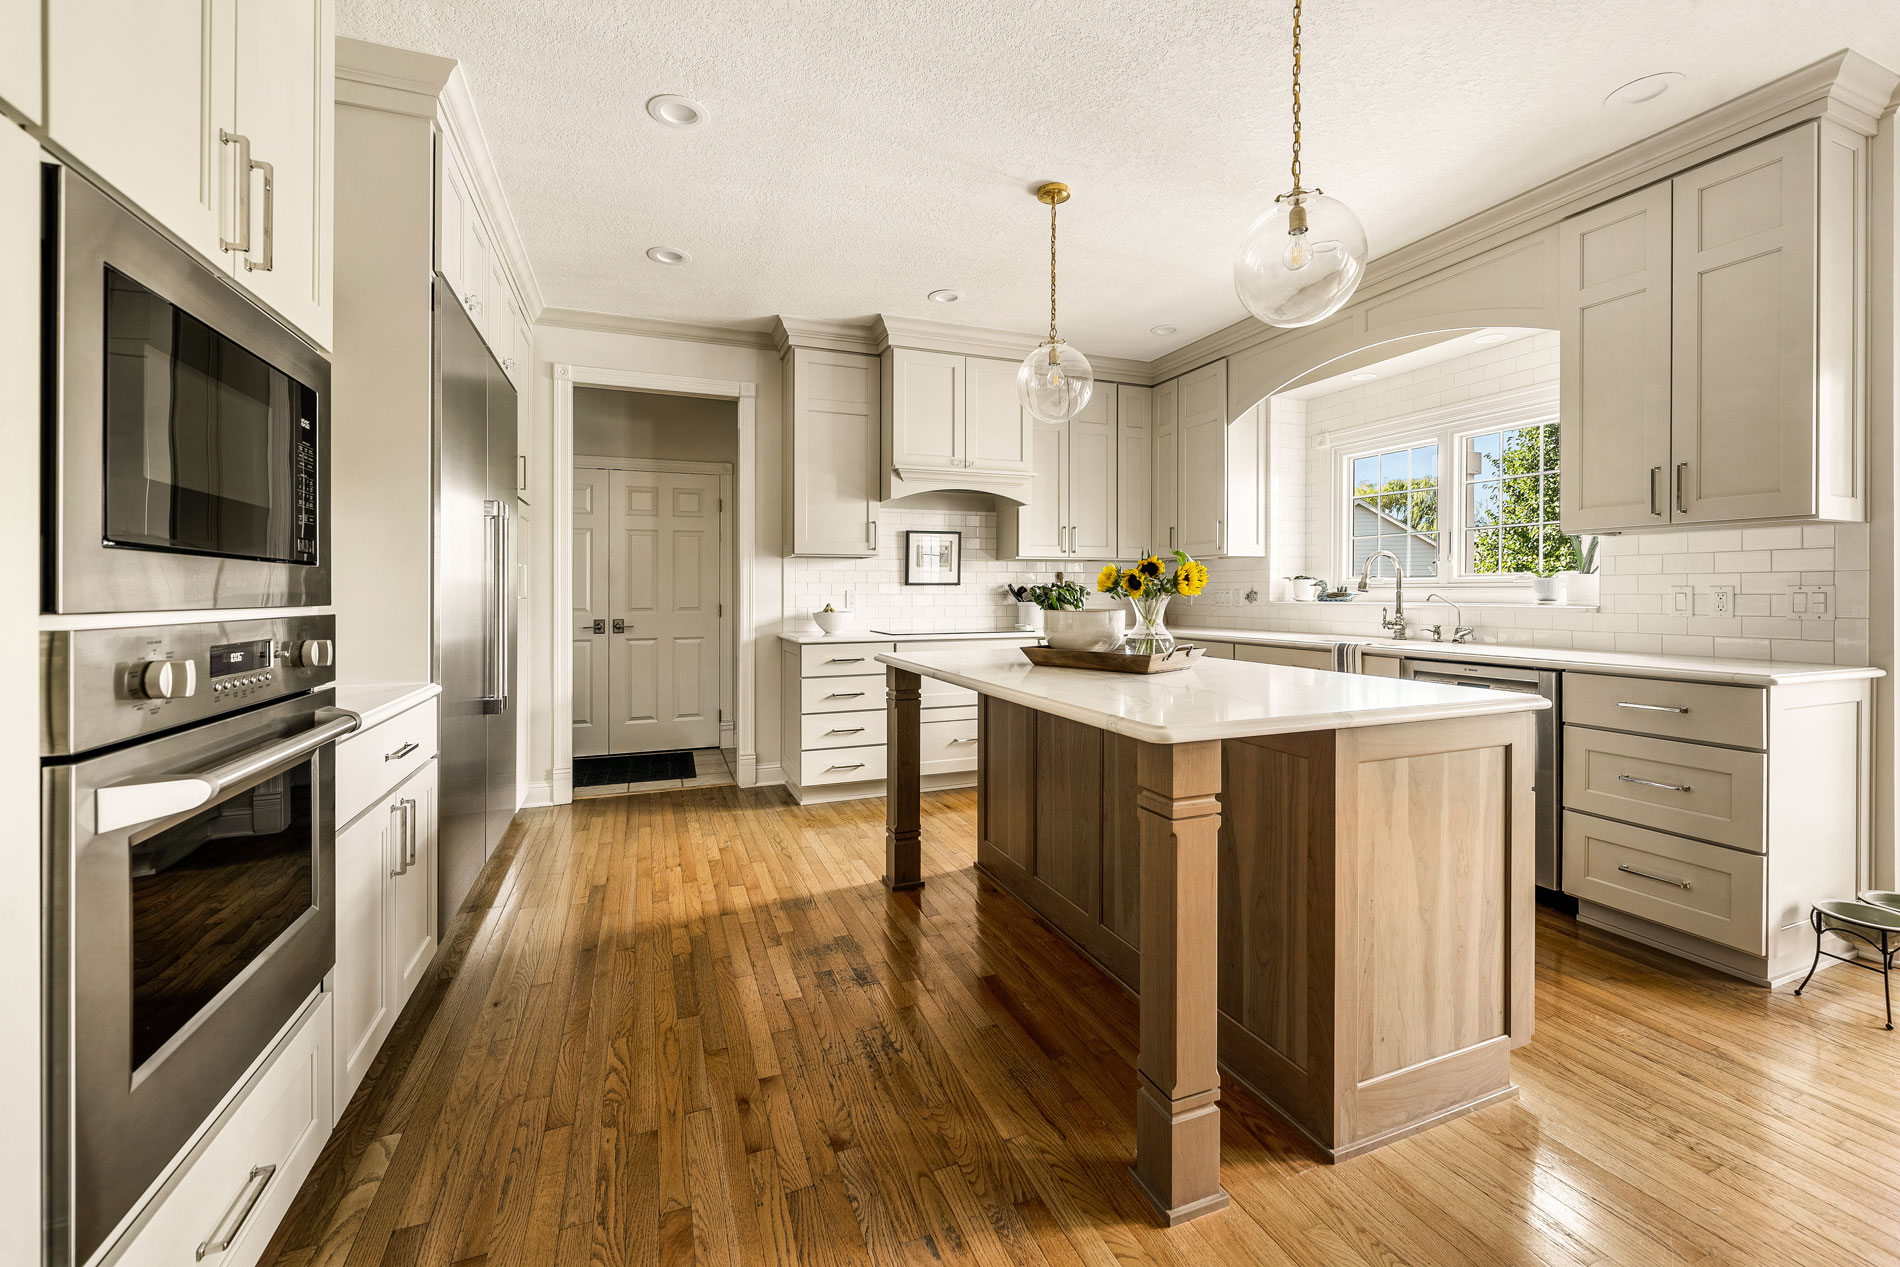 Home Remodeling Des Moines - Beautiful white and gray kitchen with natural wood floor, featuring a quartz top island.